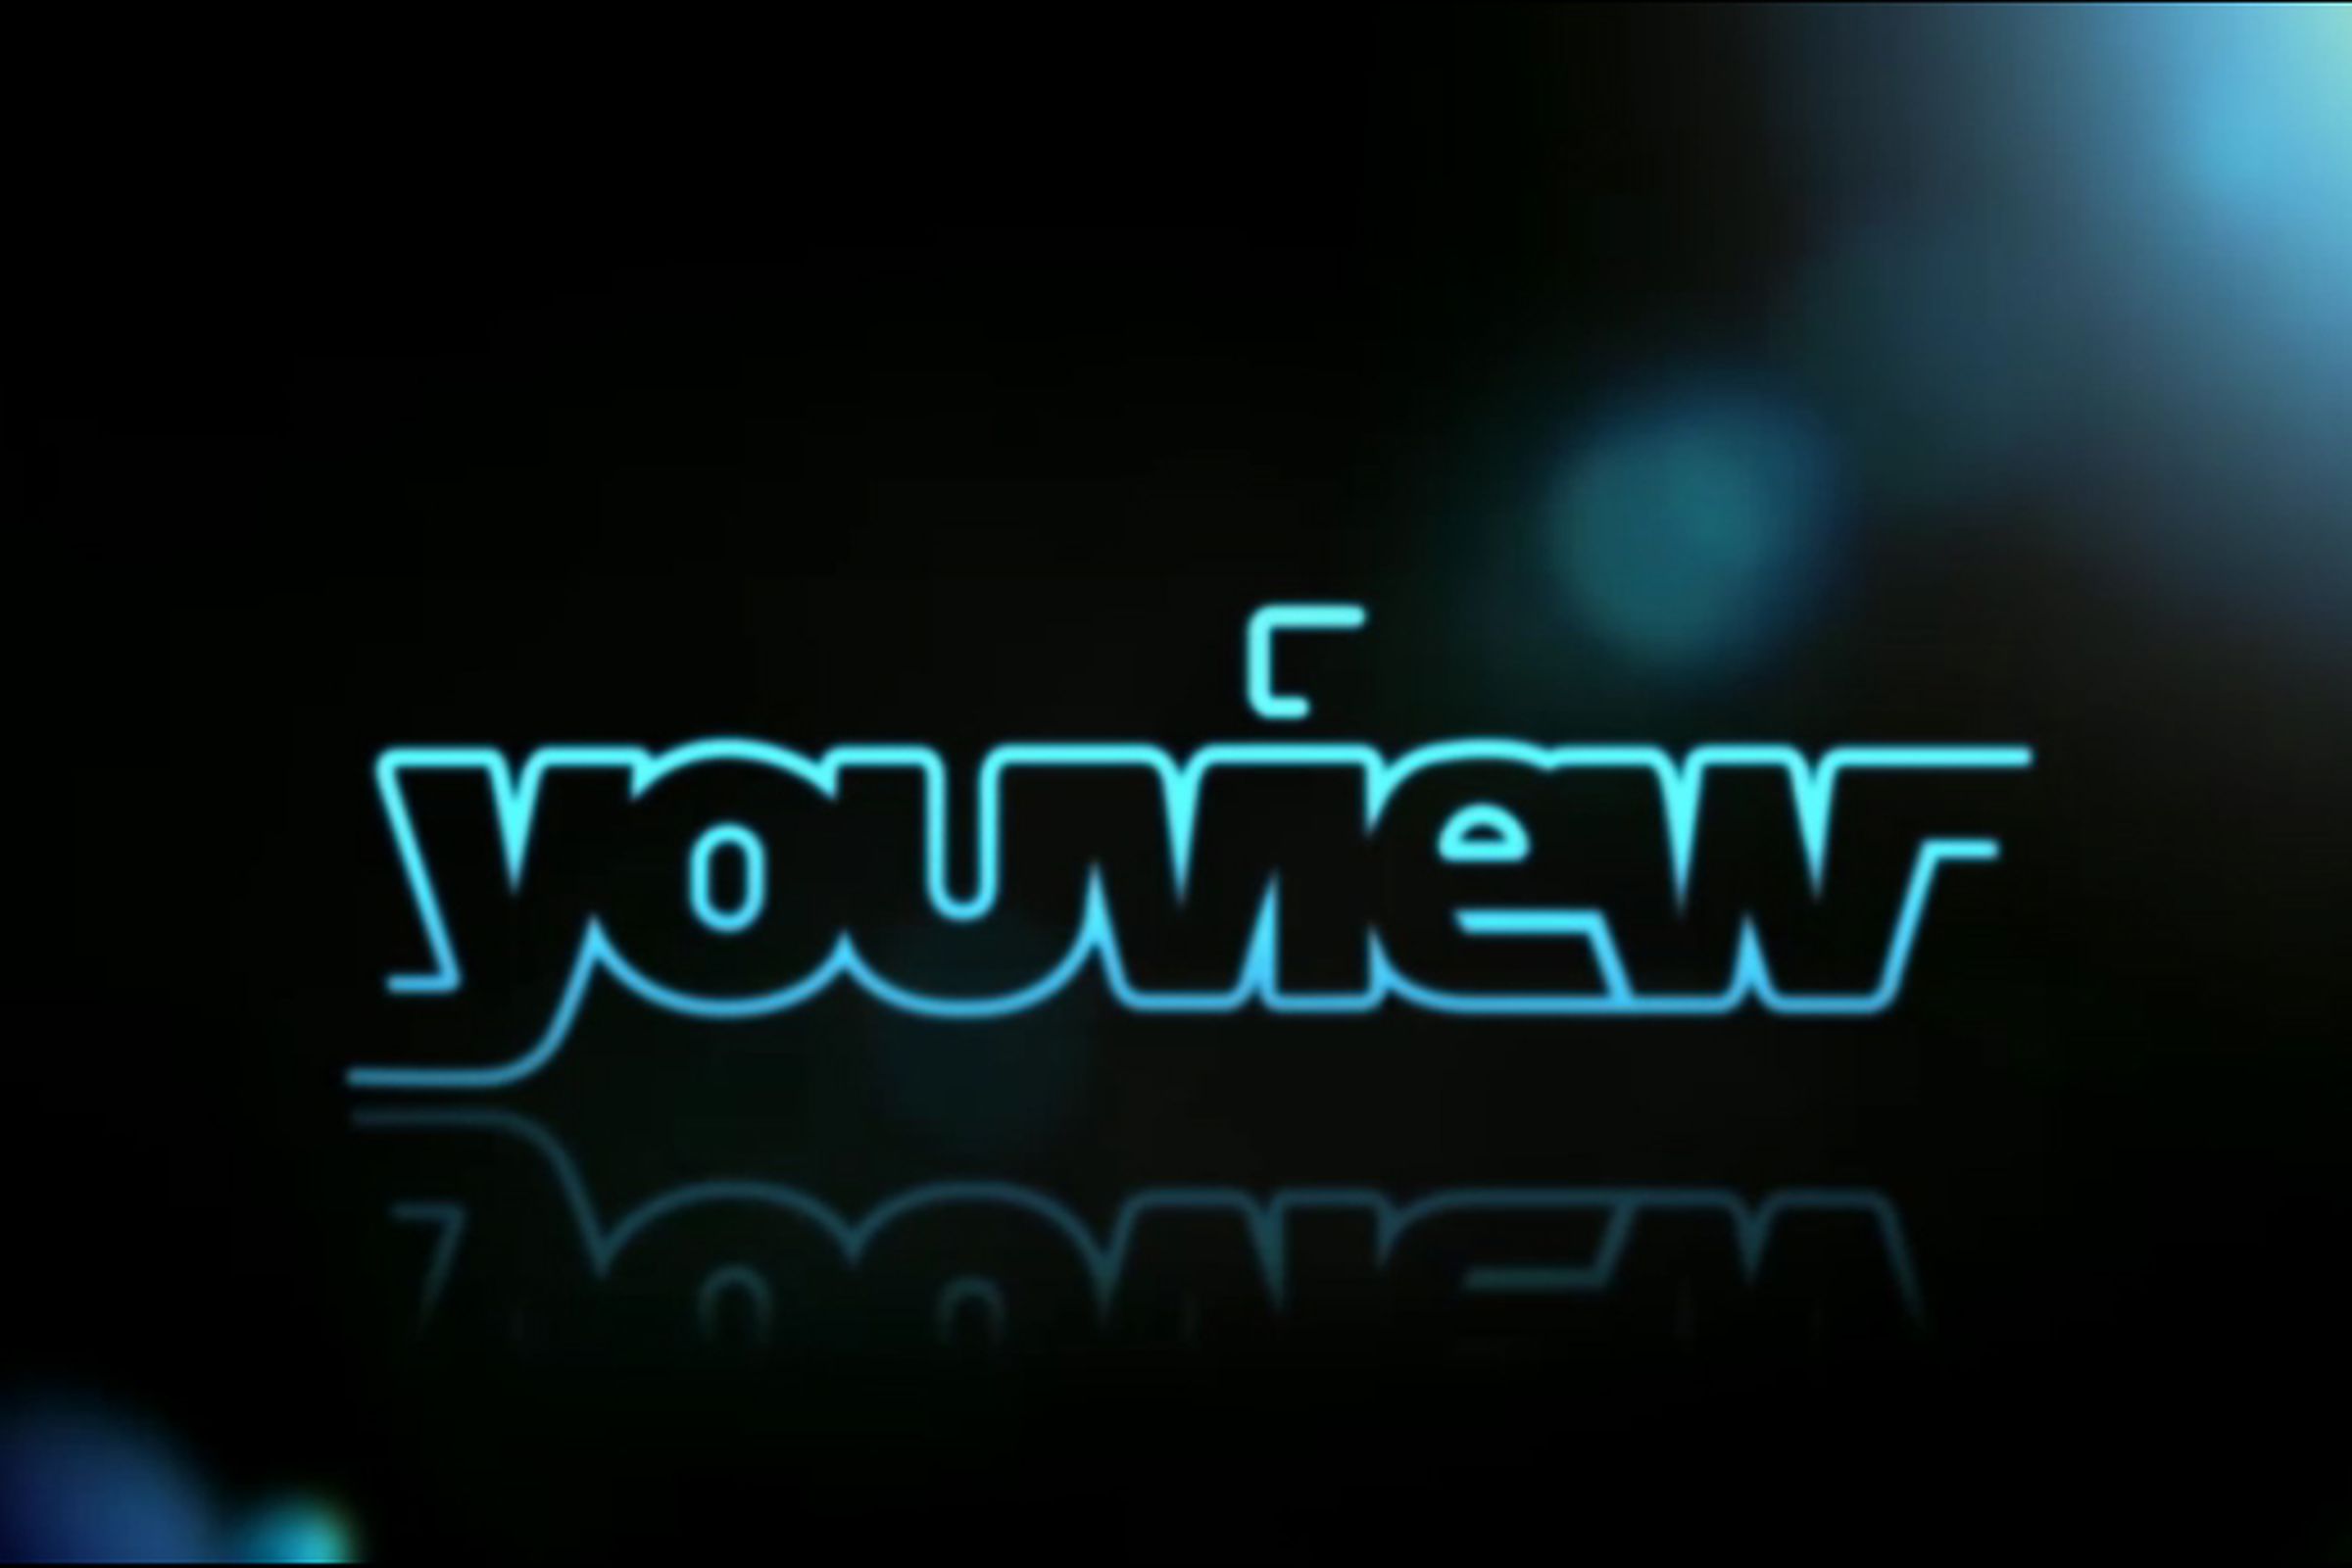 youview